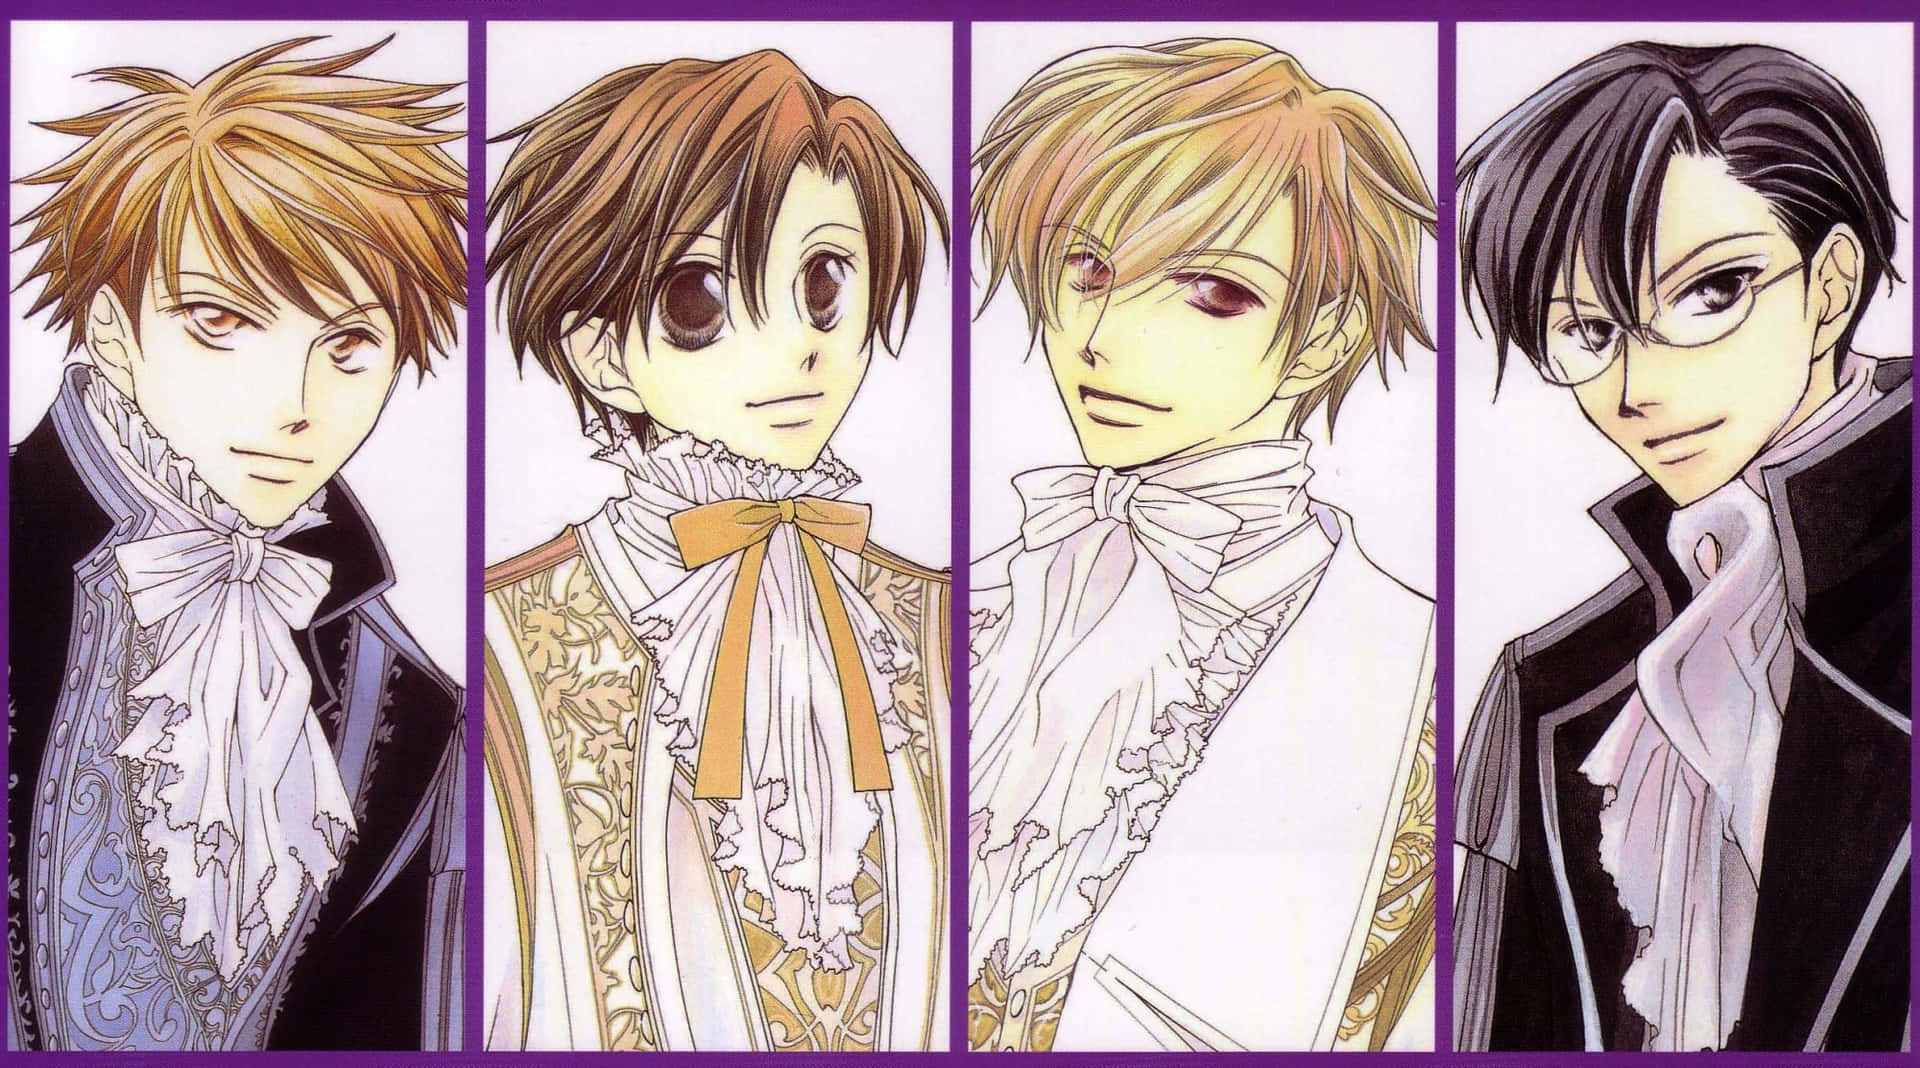 Ouran High School Host Club members gathered together in front of a window Wallpaper